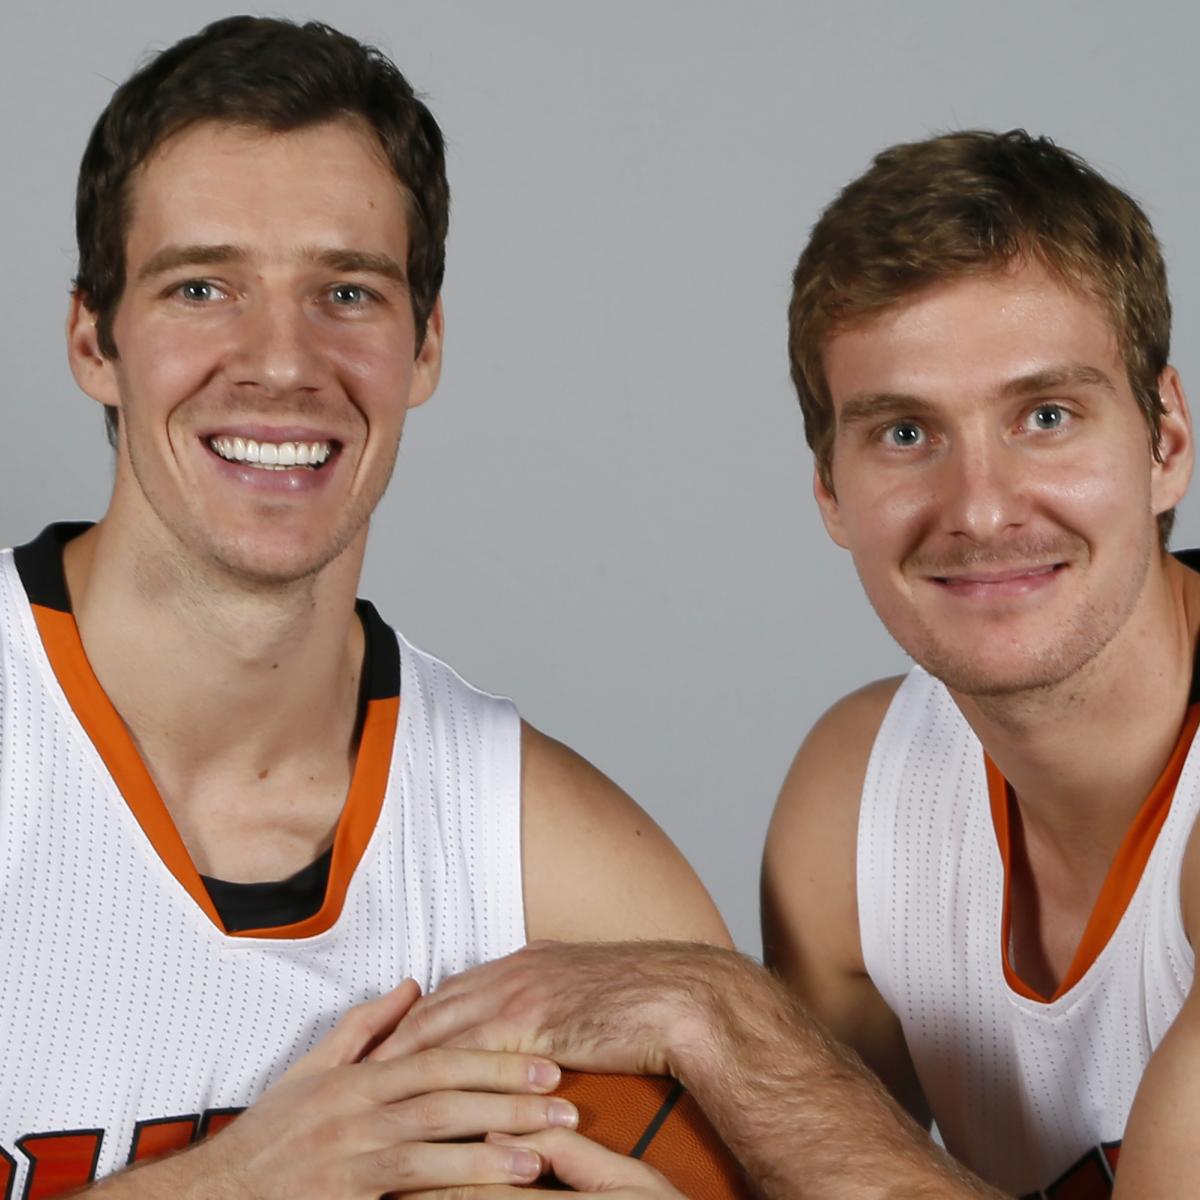 Phoenix Suns - OFFICIAL: Goran Dragic named All-NBA Third Team guard. READ,  What ONE word would you use to describe his  season?